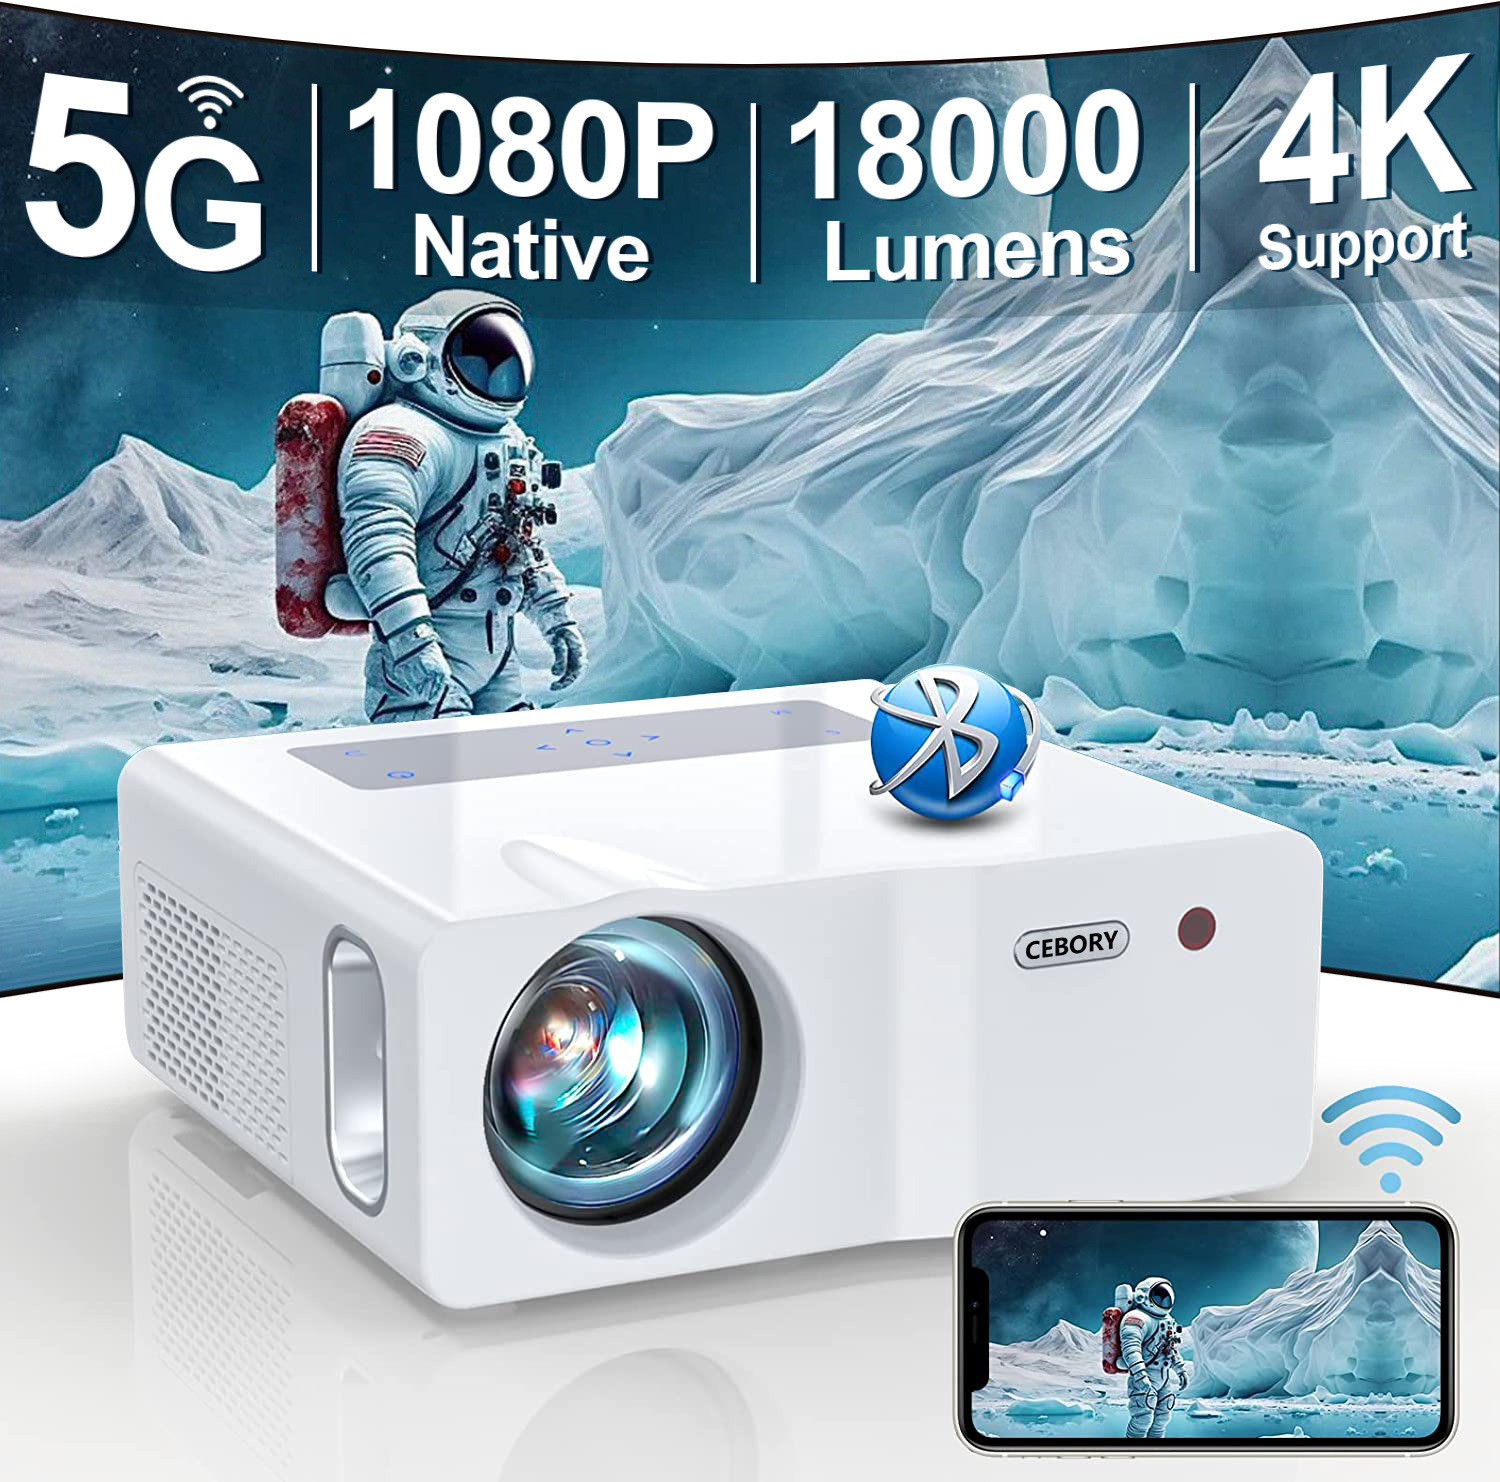 Native 1080P 5G WiFi Bluetooth Projector,18000LM 450 ANSI Outdoor Movie Projector 4K Support and Max